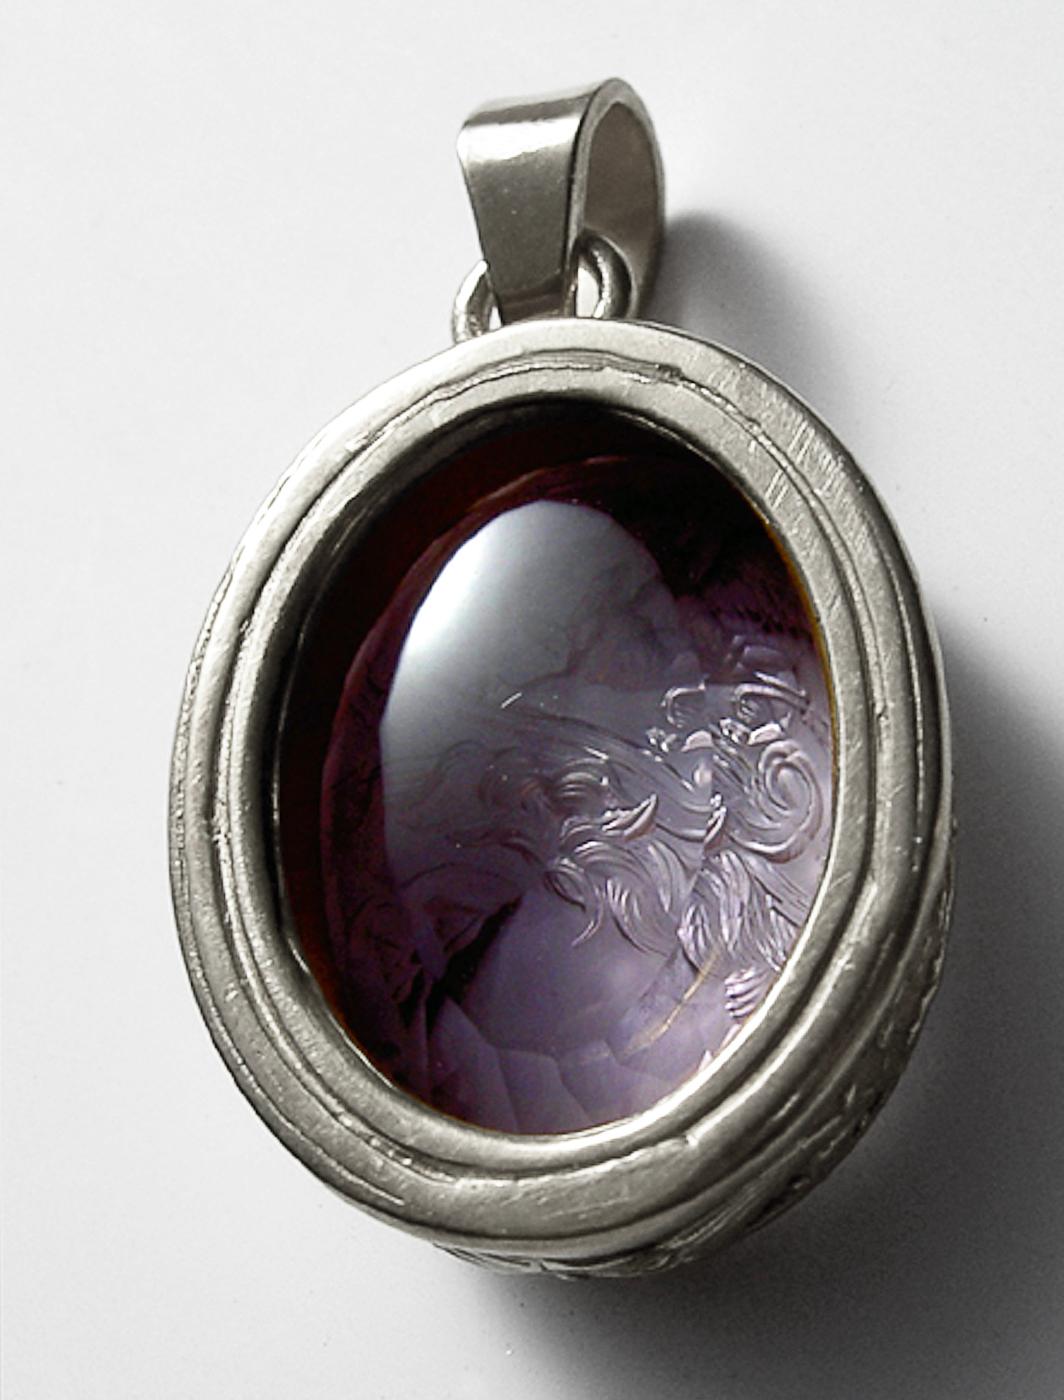 This exquisite intaglio is masterfully engraved onto amethyst and features a depiction of Athena. The stone is set in a 925 sterling silver pendant. 

Athena (Minerva) is the goddess of wisdom, courage, handicraft, and battle. She’s often depicted